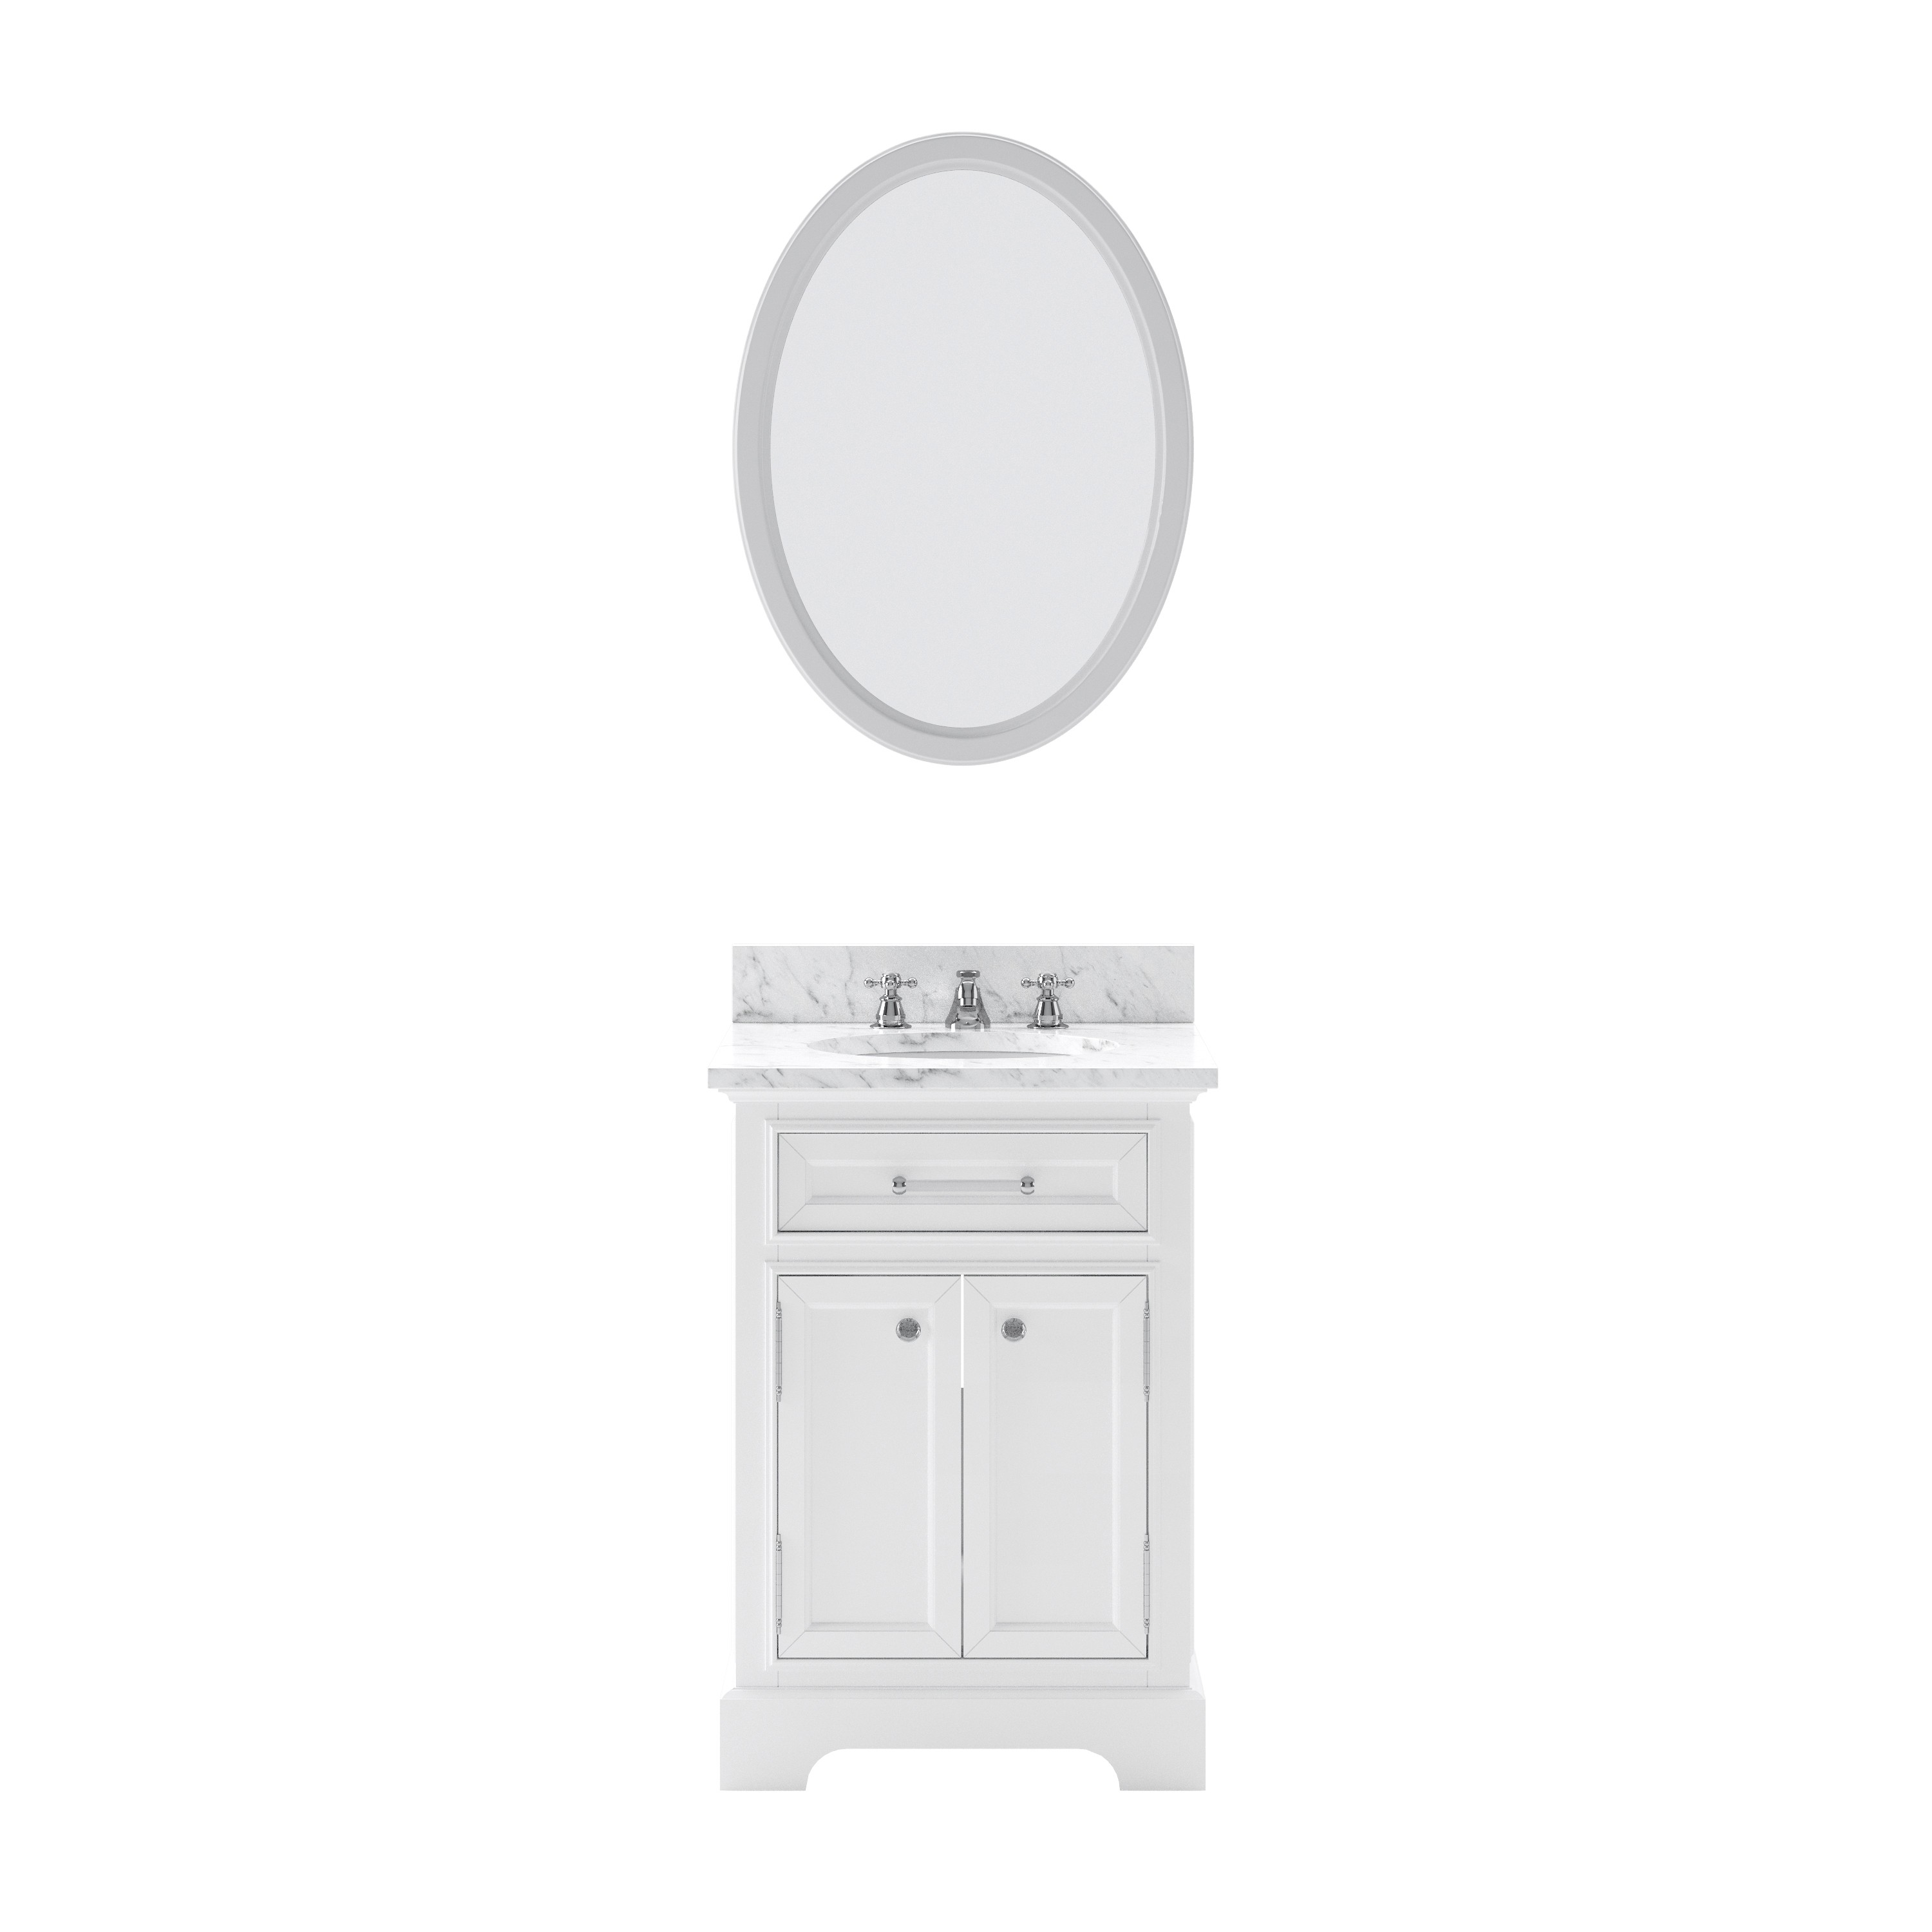 WATER-CREATION DE24CW01PW-O21BX0901 DERBY 24 INCH PURE WHITE SINGLE SINK BATHROOM VANITY WITH MATCHING FRAMED MIRROR AND FAUCET